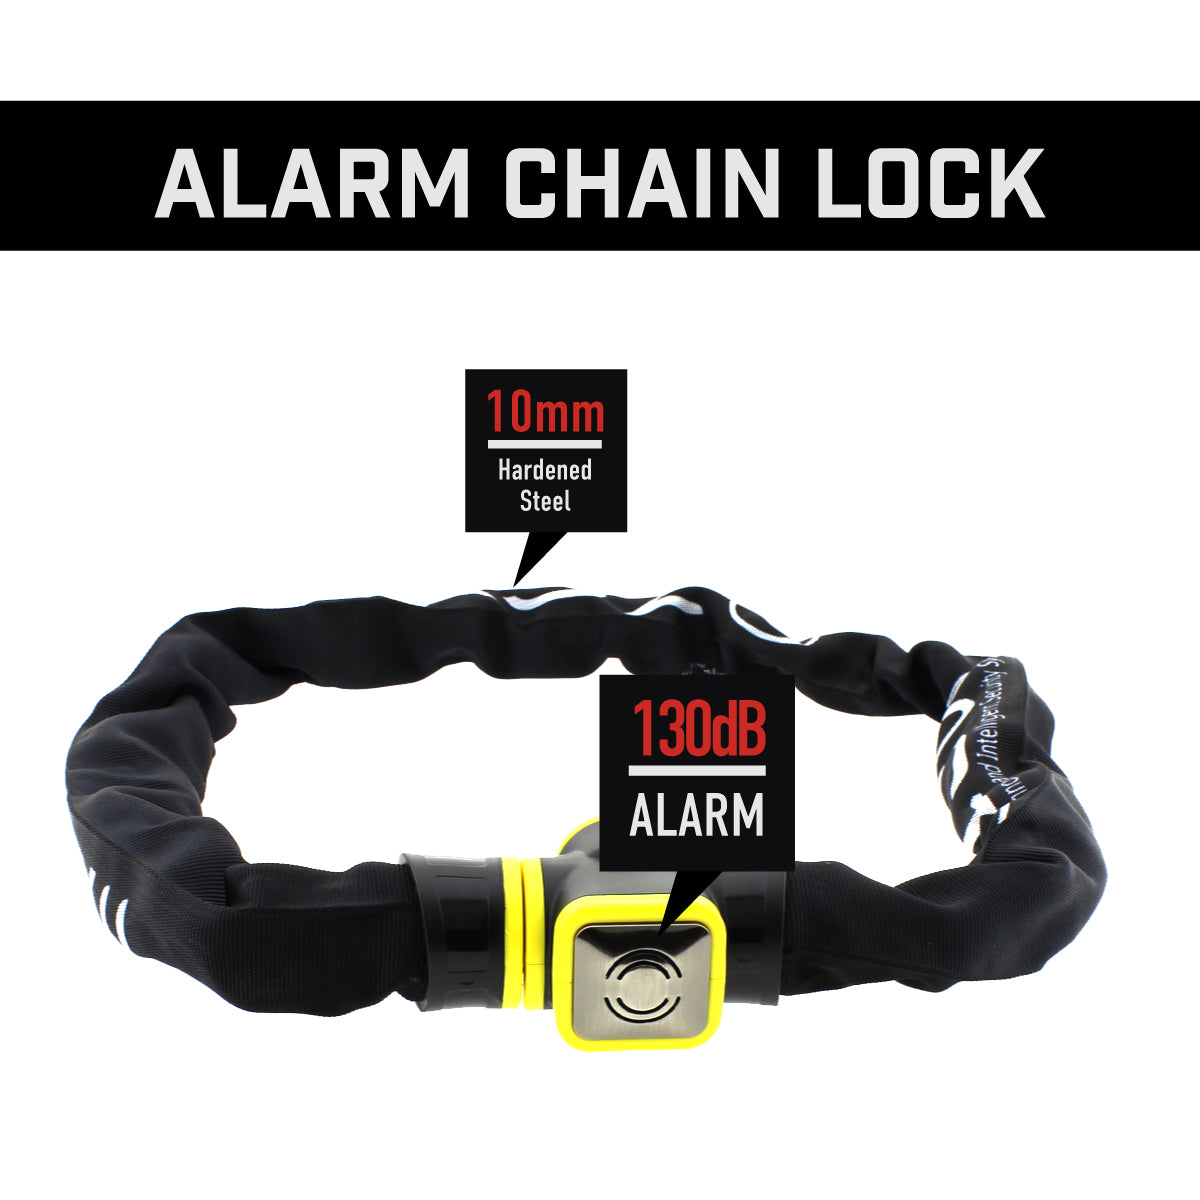 The image presents a security product by Blackstone called "ALARM CHAIN LOCK." It features a 10mm hardened steel chain covered with a black protective sleeve to prevent damage to objects it secures. The highlight of this lock is the integrated 130dB alarm system housed in a yellow lock unit, which provides an additional deterrent to potential theft. This type of lock is typically used for bikes or motorcycles, offering robust physical security along with the alarm feature for enhanced safety.